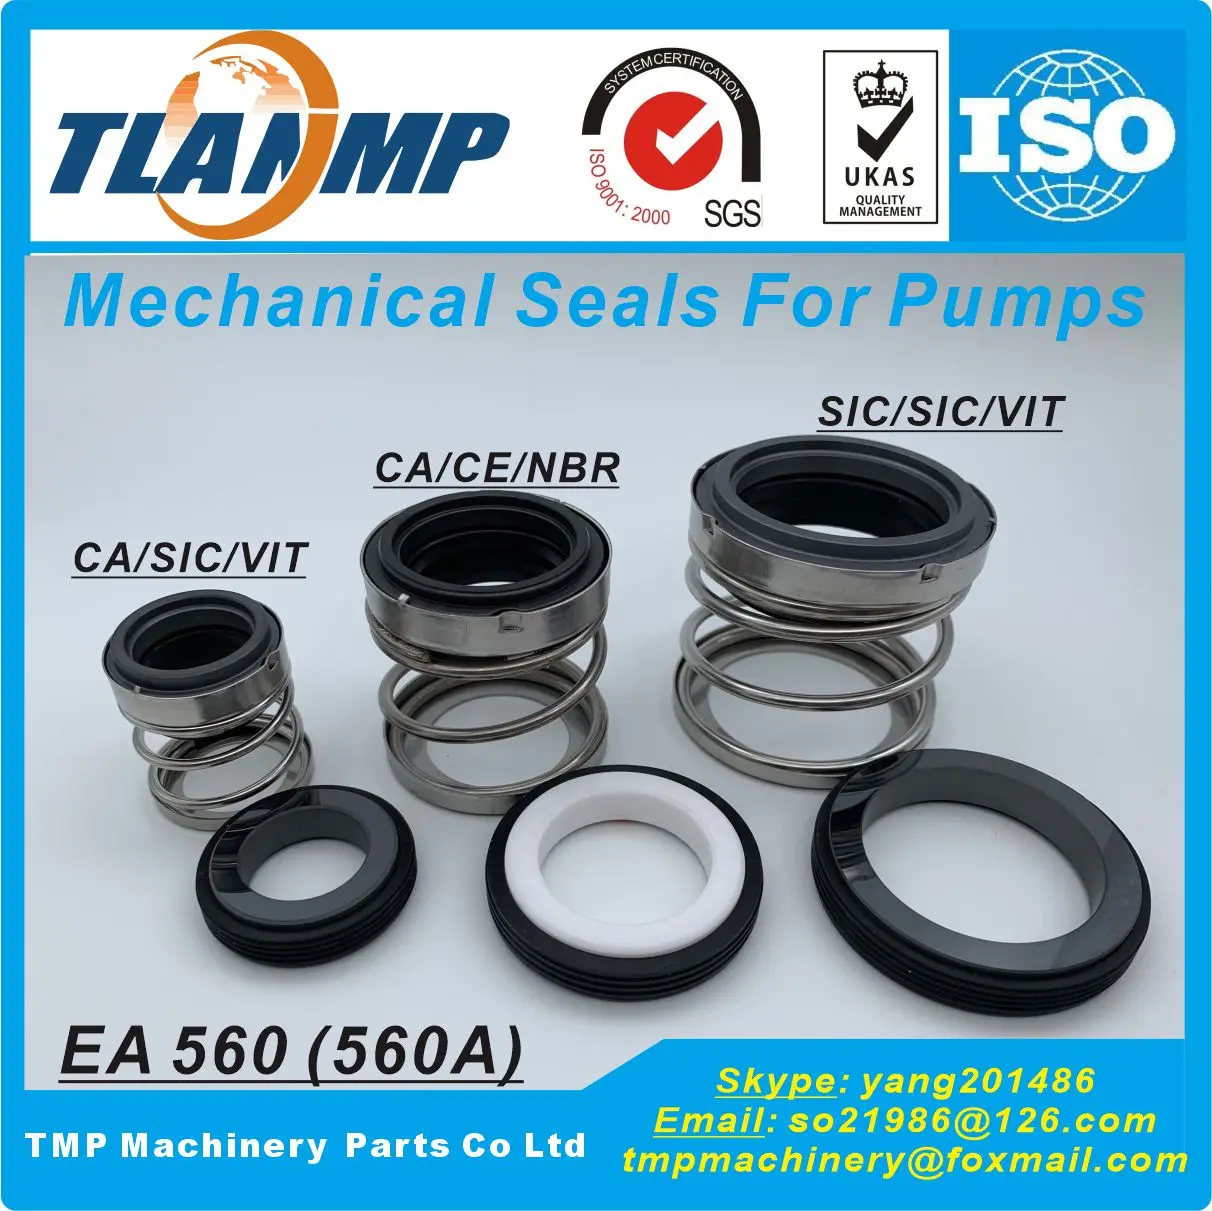 

EA560-30 , 560A-30 , 560-30 Mechanical Seals for Chemical industry Submersible/Circulating Pumps